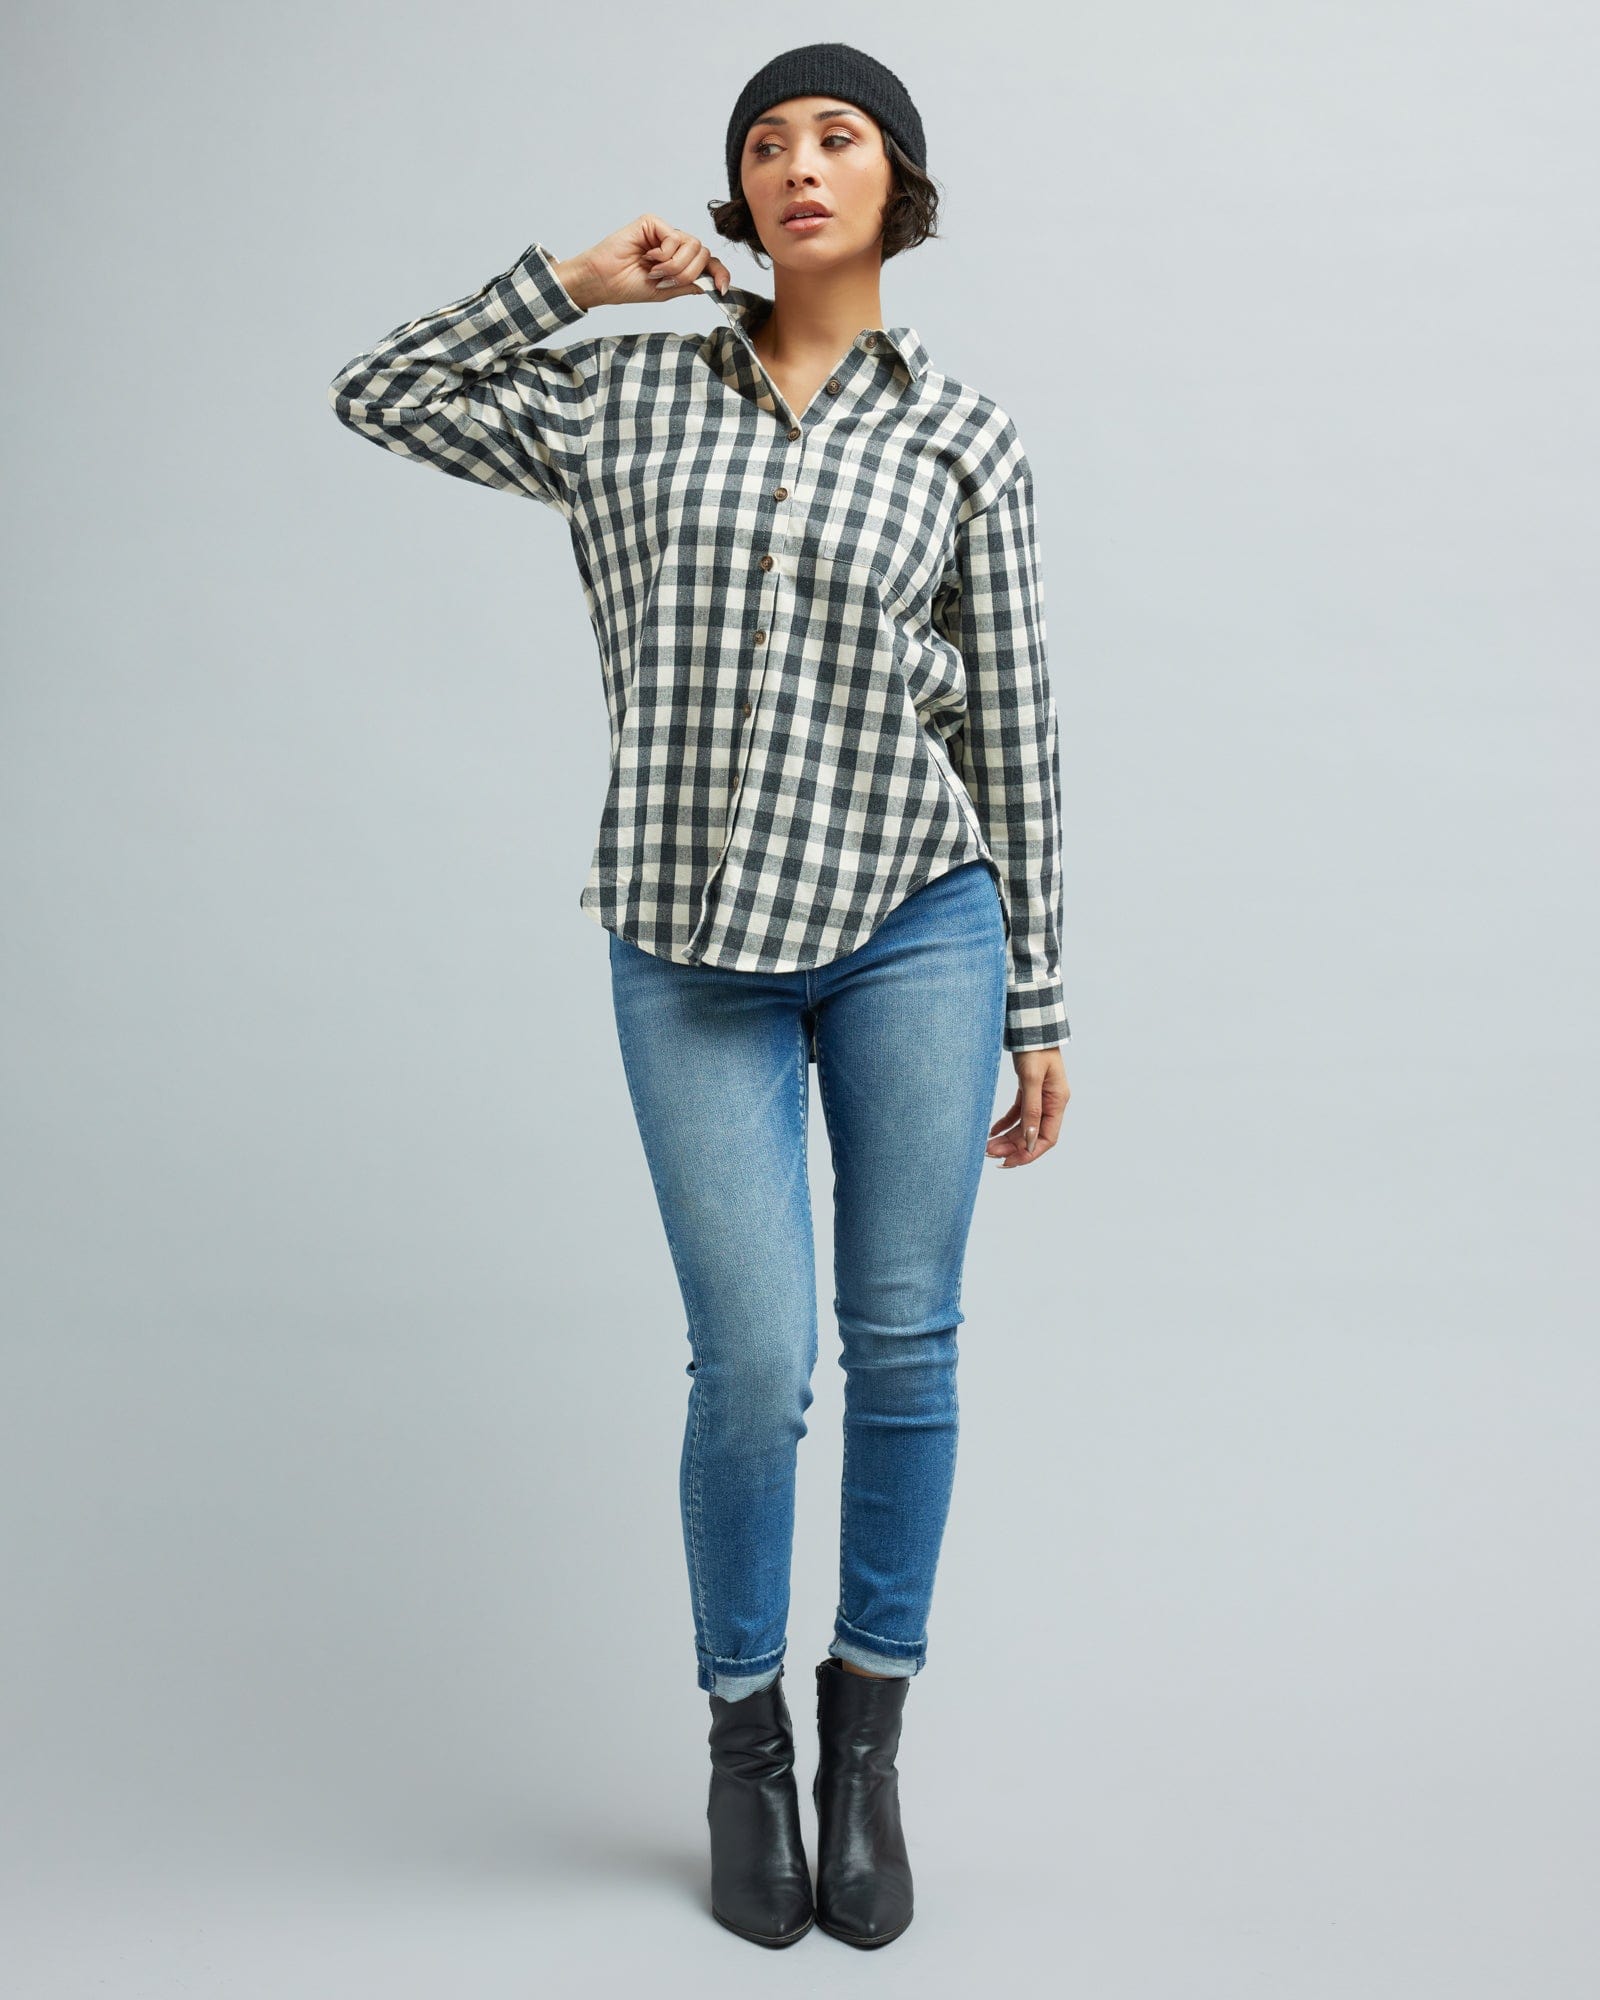 Woman in a long sleeve, black and white gingham, button-down blouse